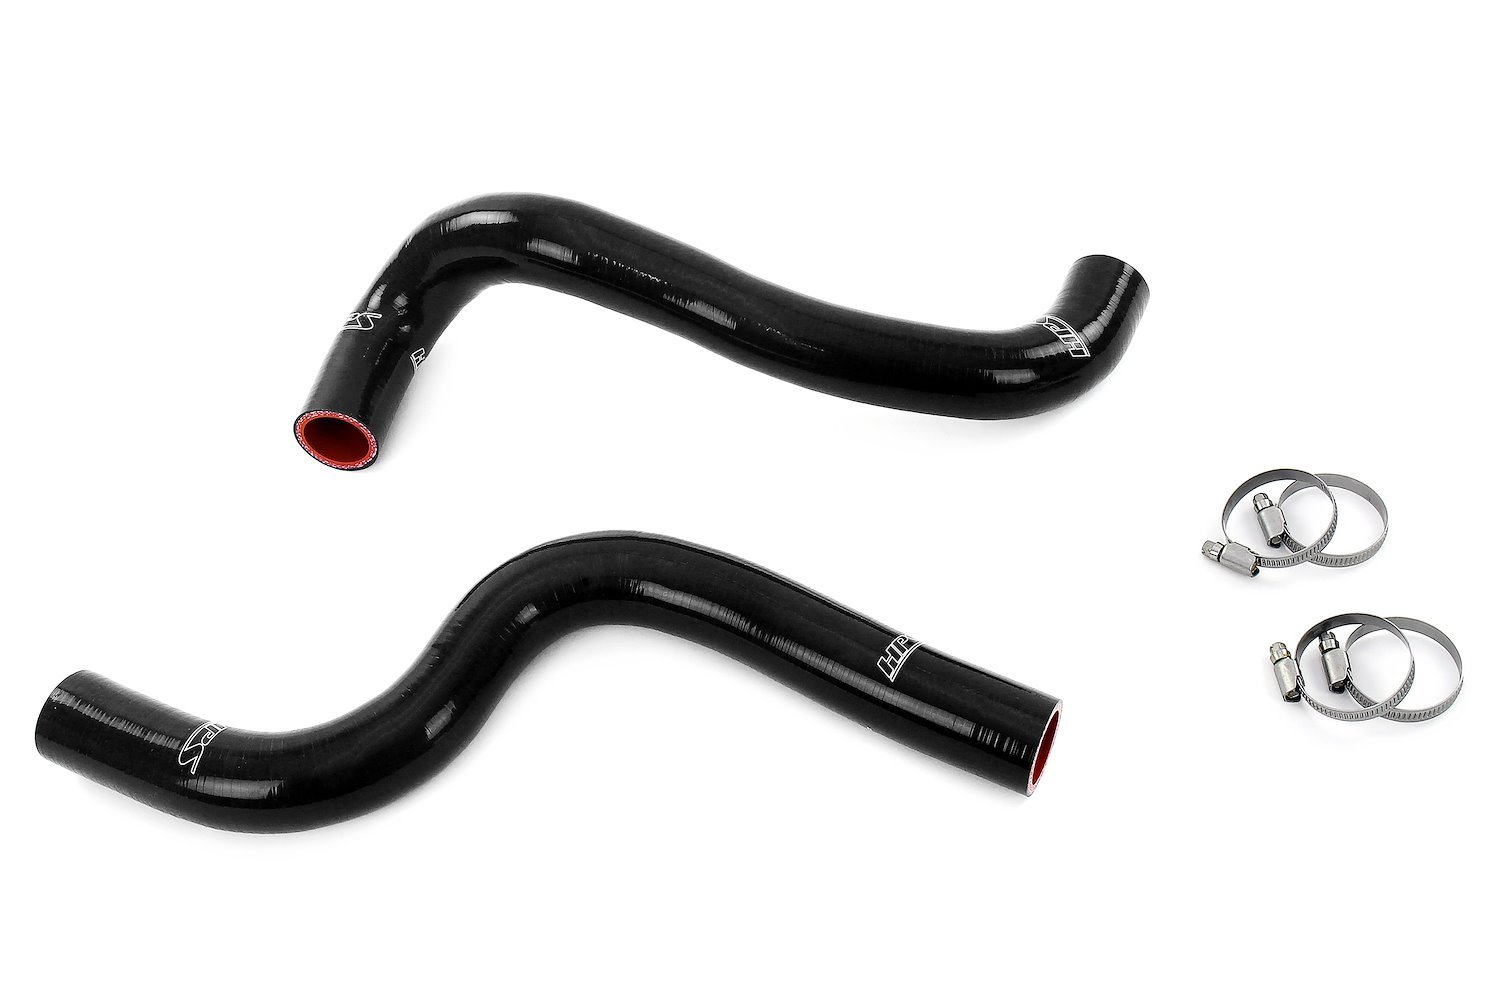 57-2101-BLK Radiator Hose Kit, 3-Ply Reinforced Silicone, Replaces Rubber Radiator Coolant Hoses